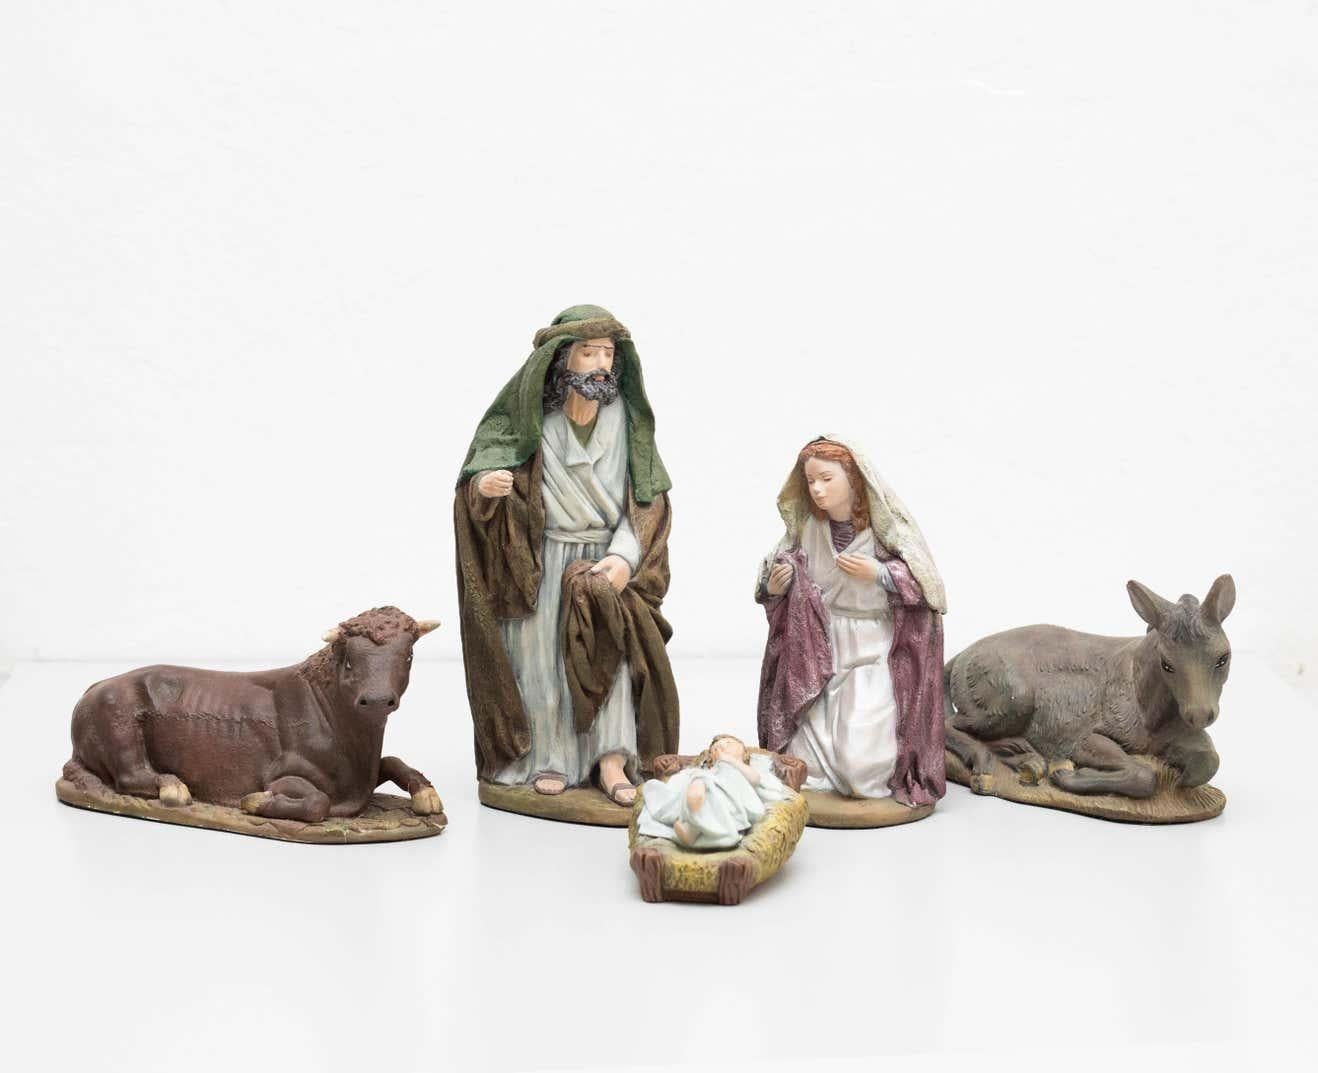 Set of five nativitiy scene figures, 1960 
Made in Barcelona, Spain.


In original condition, with minor wear consistent with age and use, preserving a beautiful patina.

Materials:
Plaster

Dimensions:
1- D 9 cm x W 10.5 cm x H 7 cm
2- D